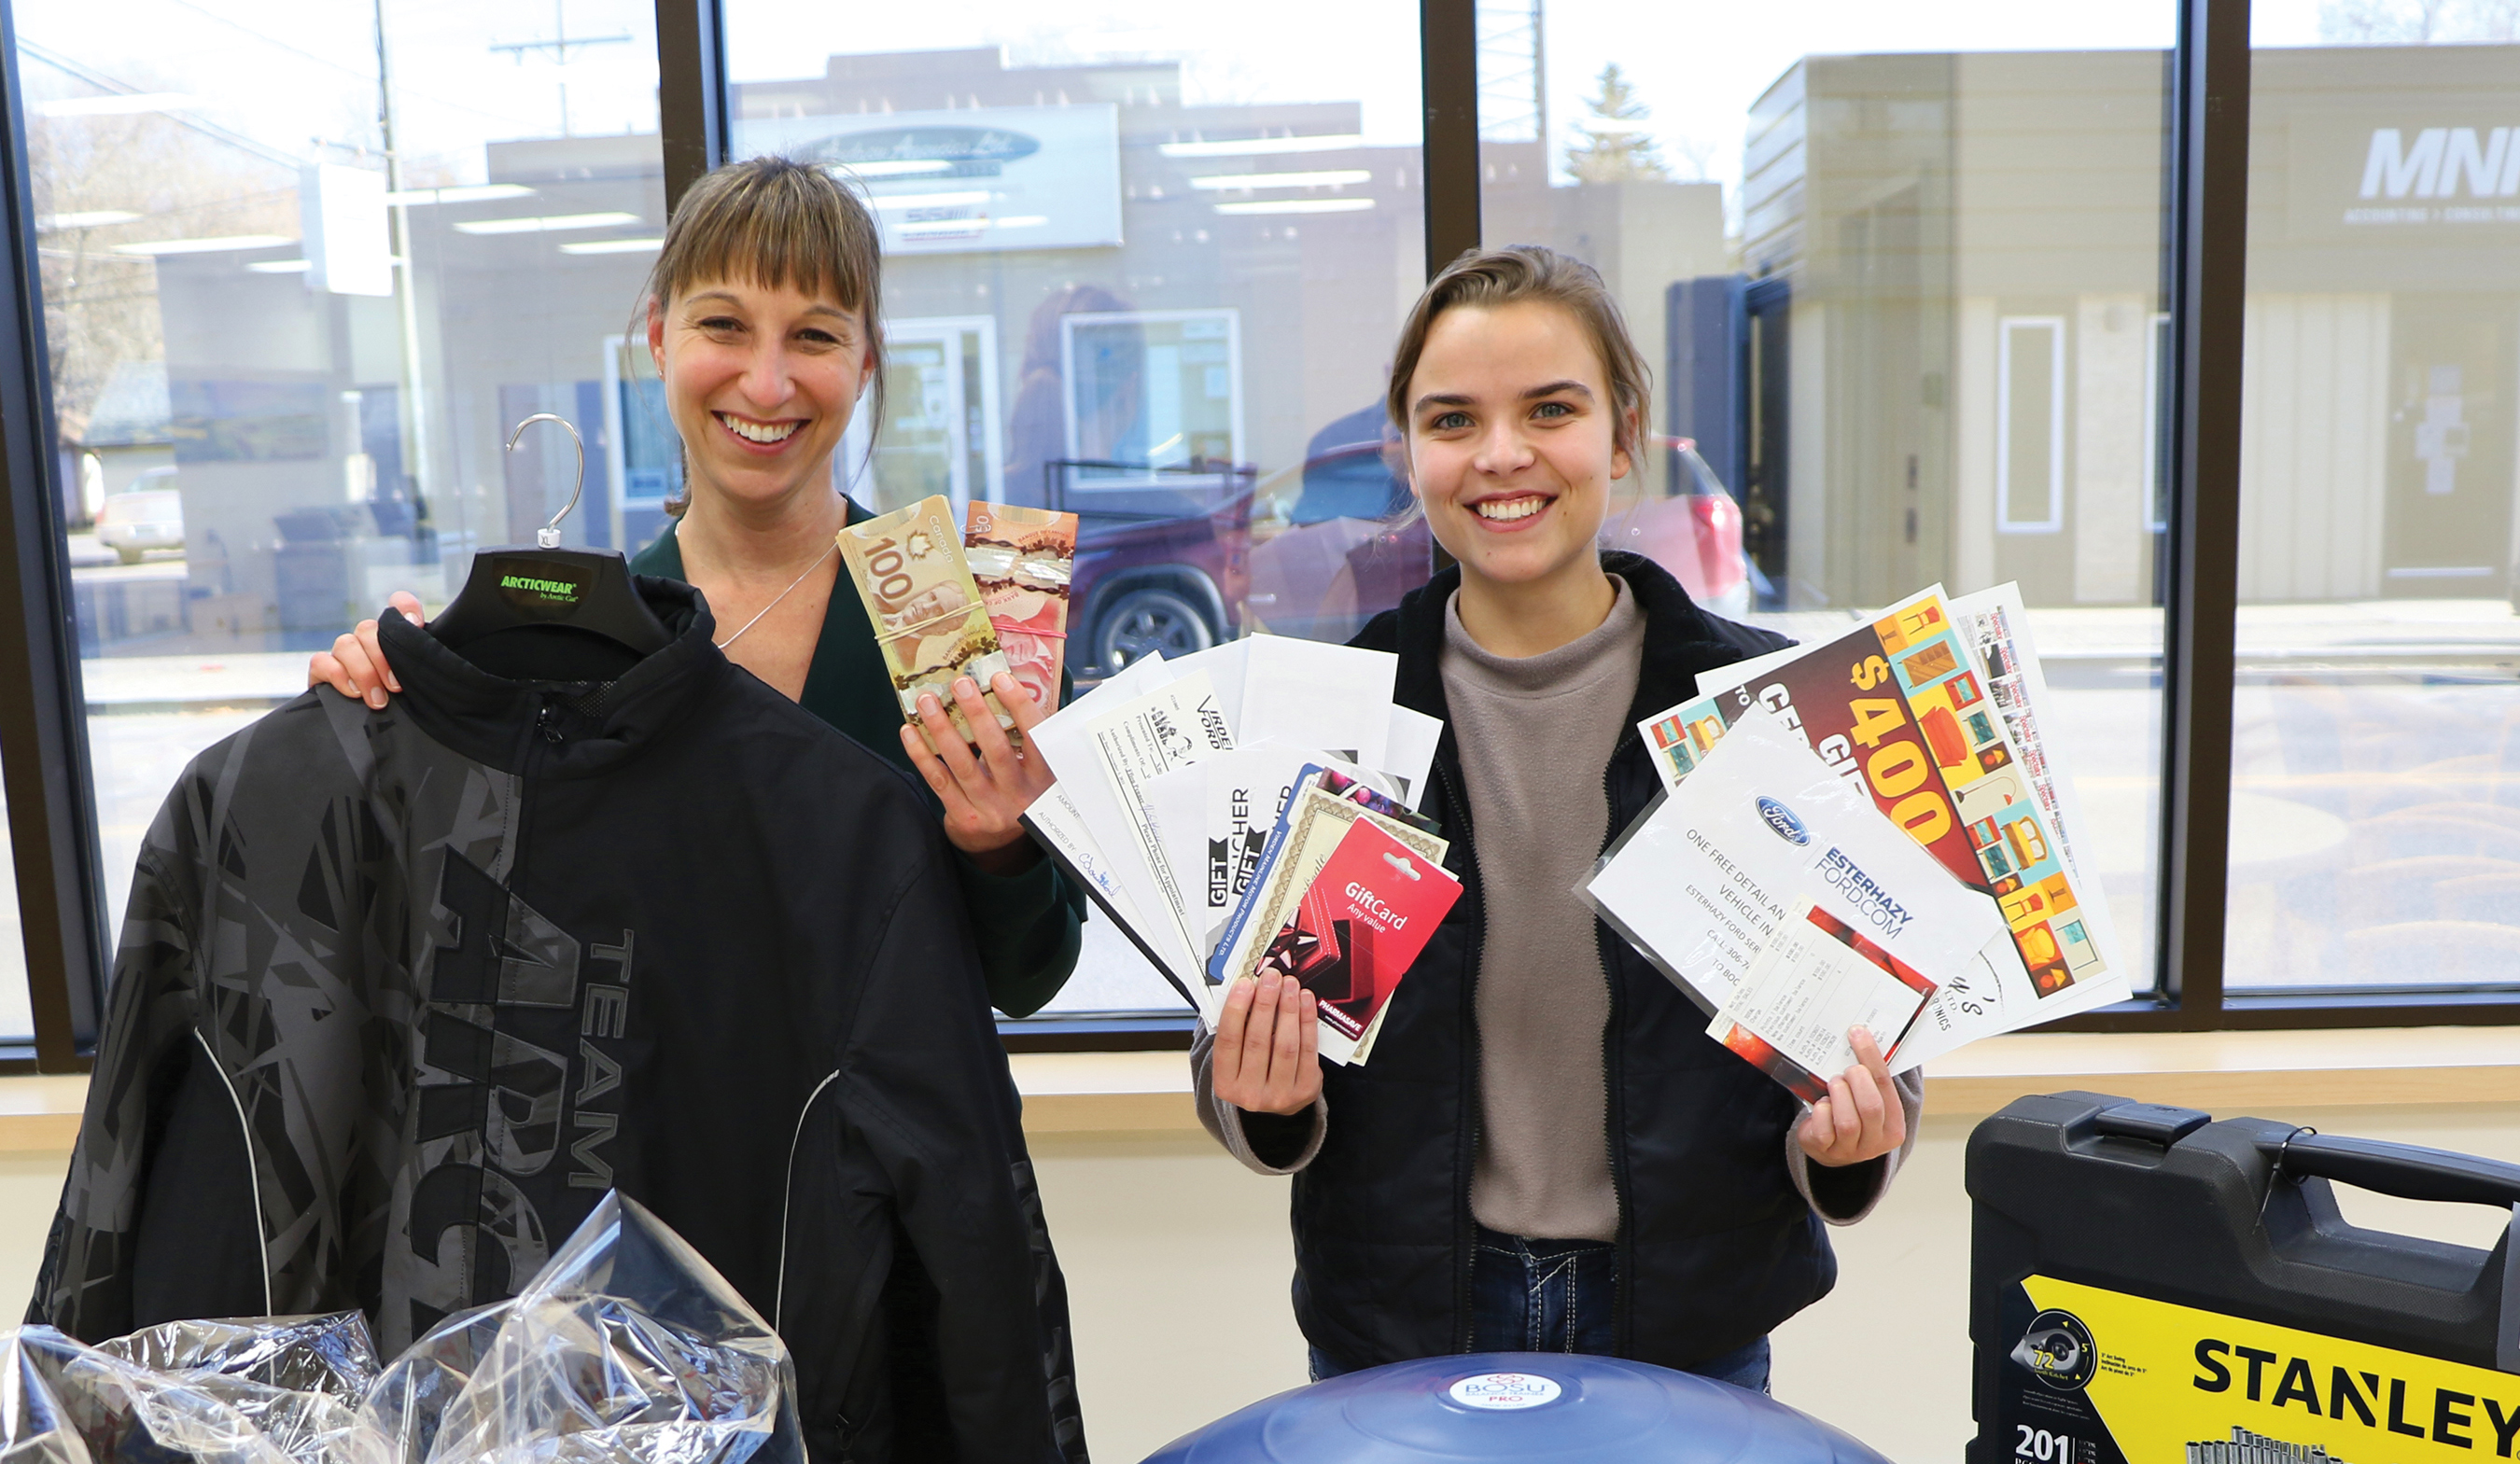 The World-Spectator’s Kara Kinna and Sunnette Kamffer with some of the prizes in the World-Spectator’s $15,000 Christmas Giveaway